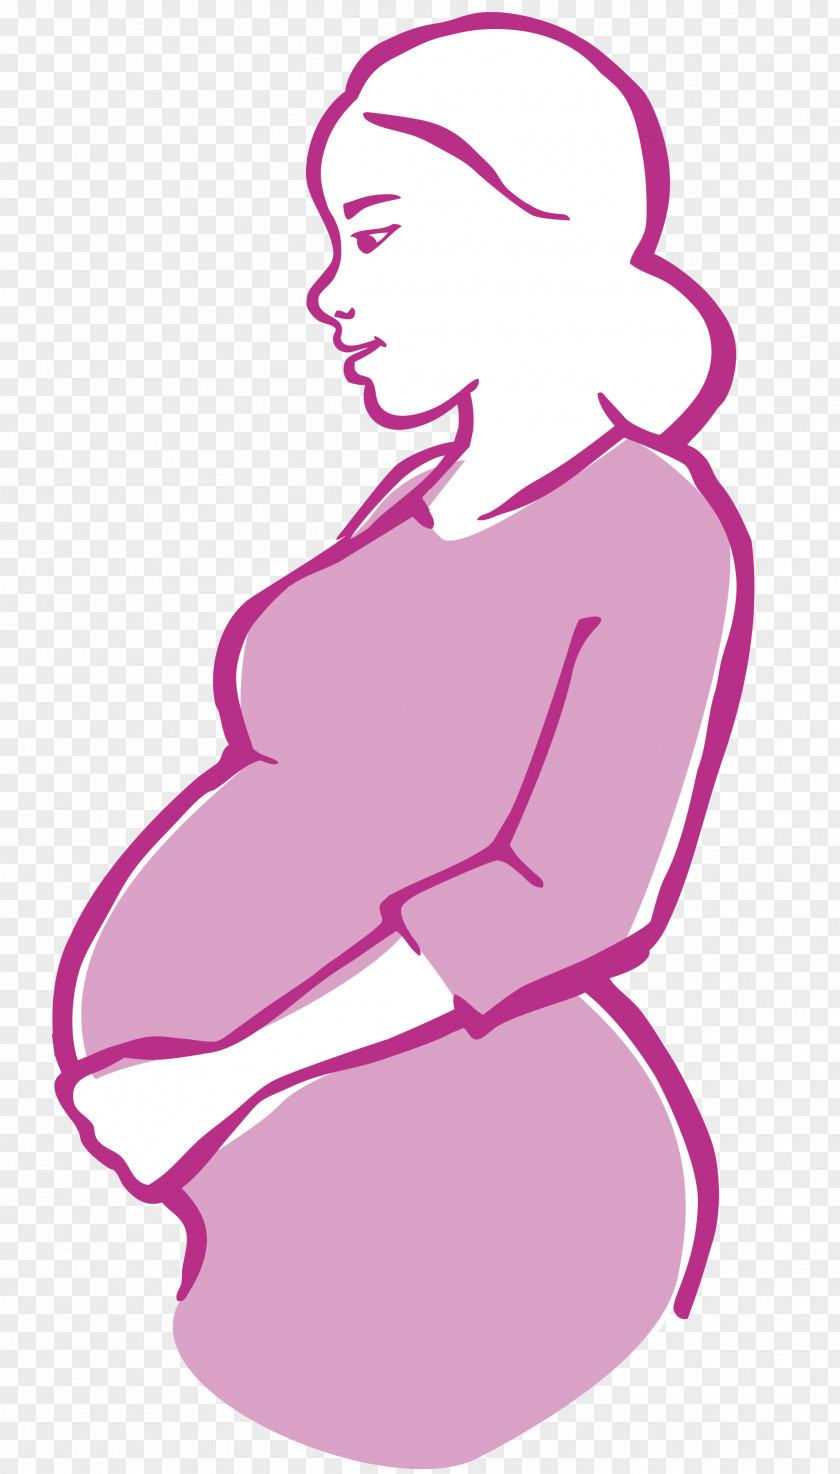 Pregnant Pregnancy Woman Doula Maternity Centre Miscarriage PNG